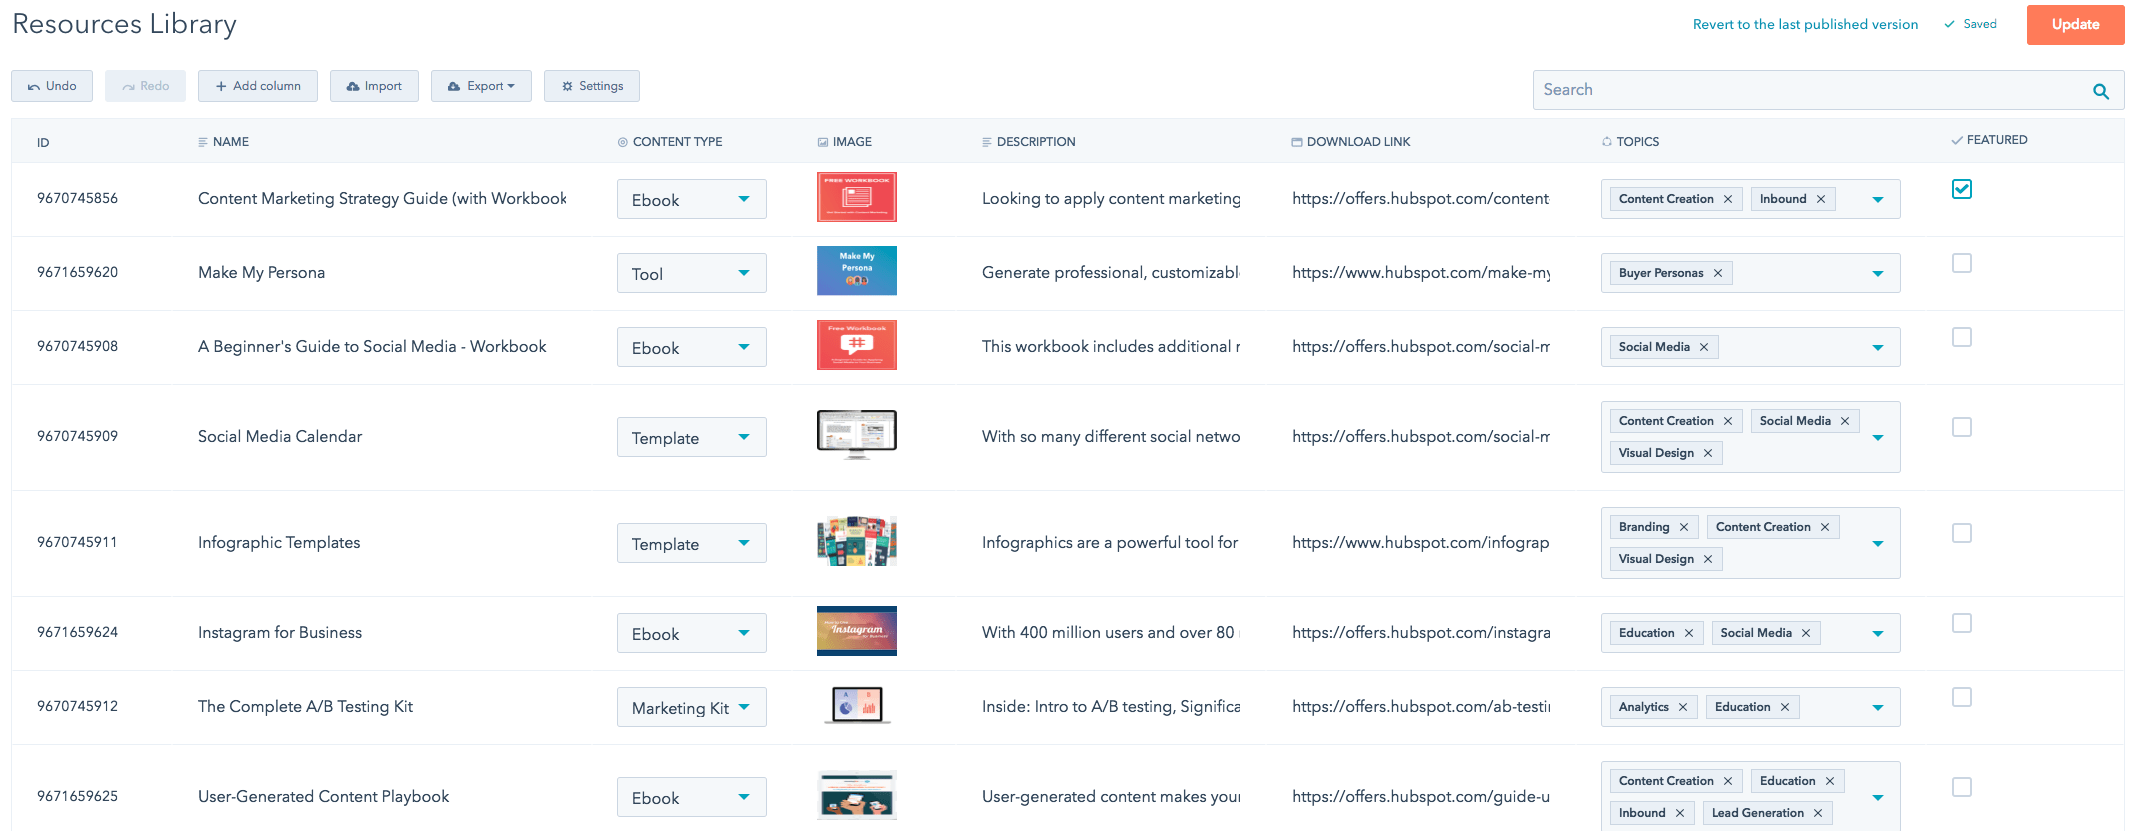 screenshot of HubSpot's resources library that's built using HubDB